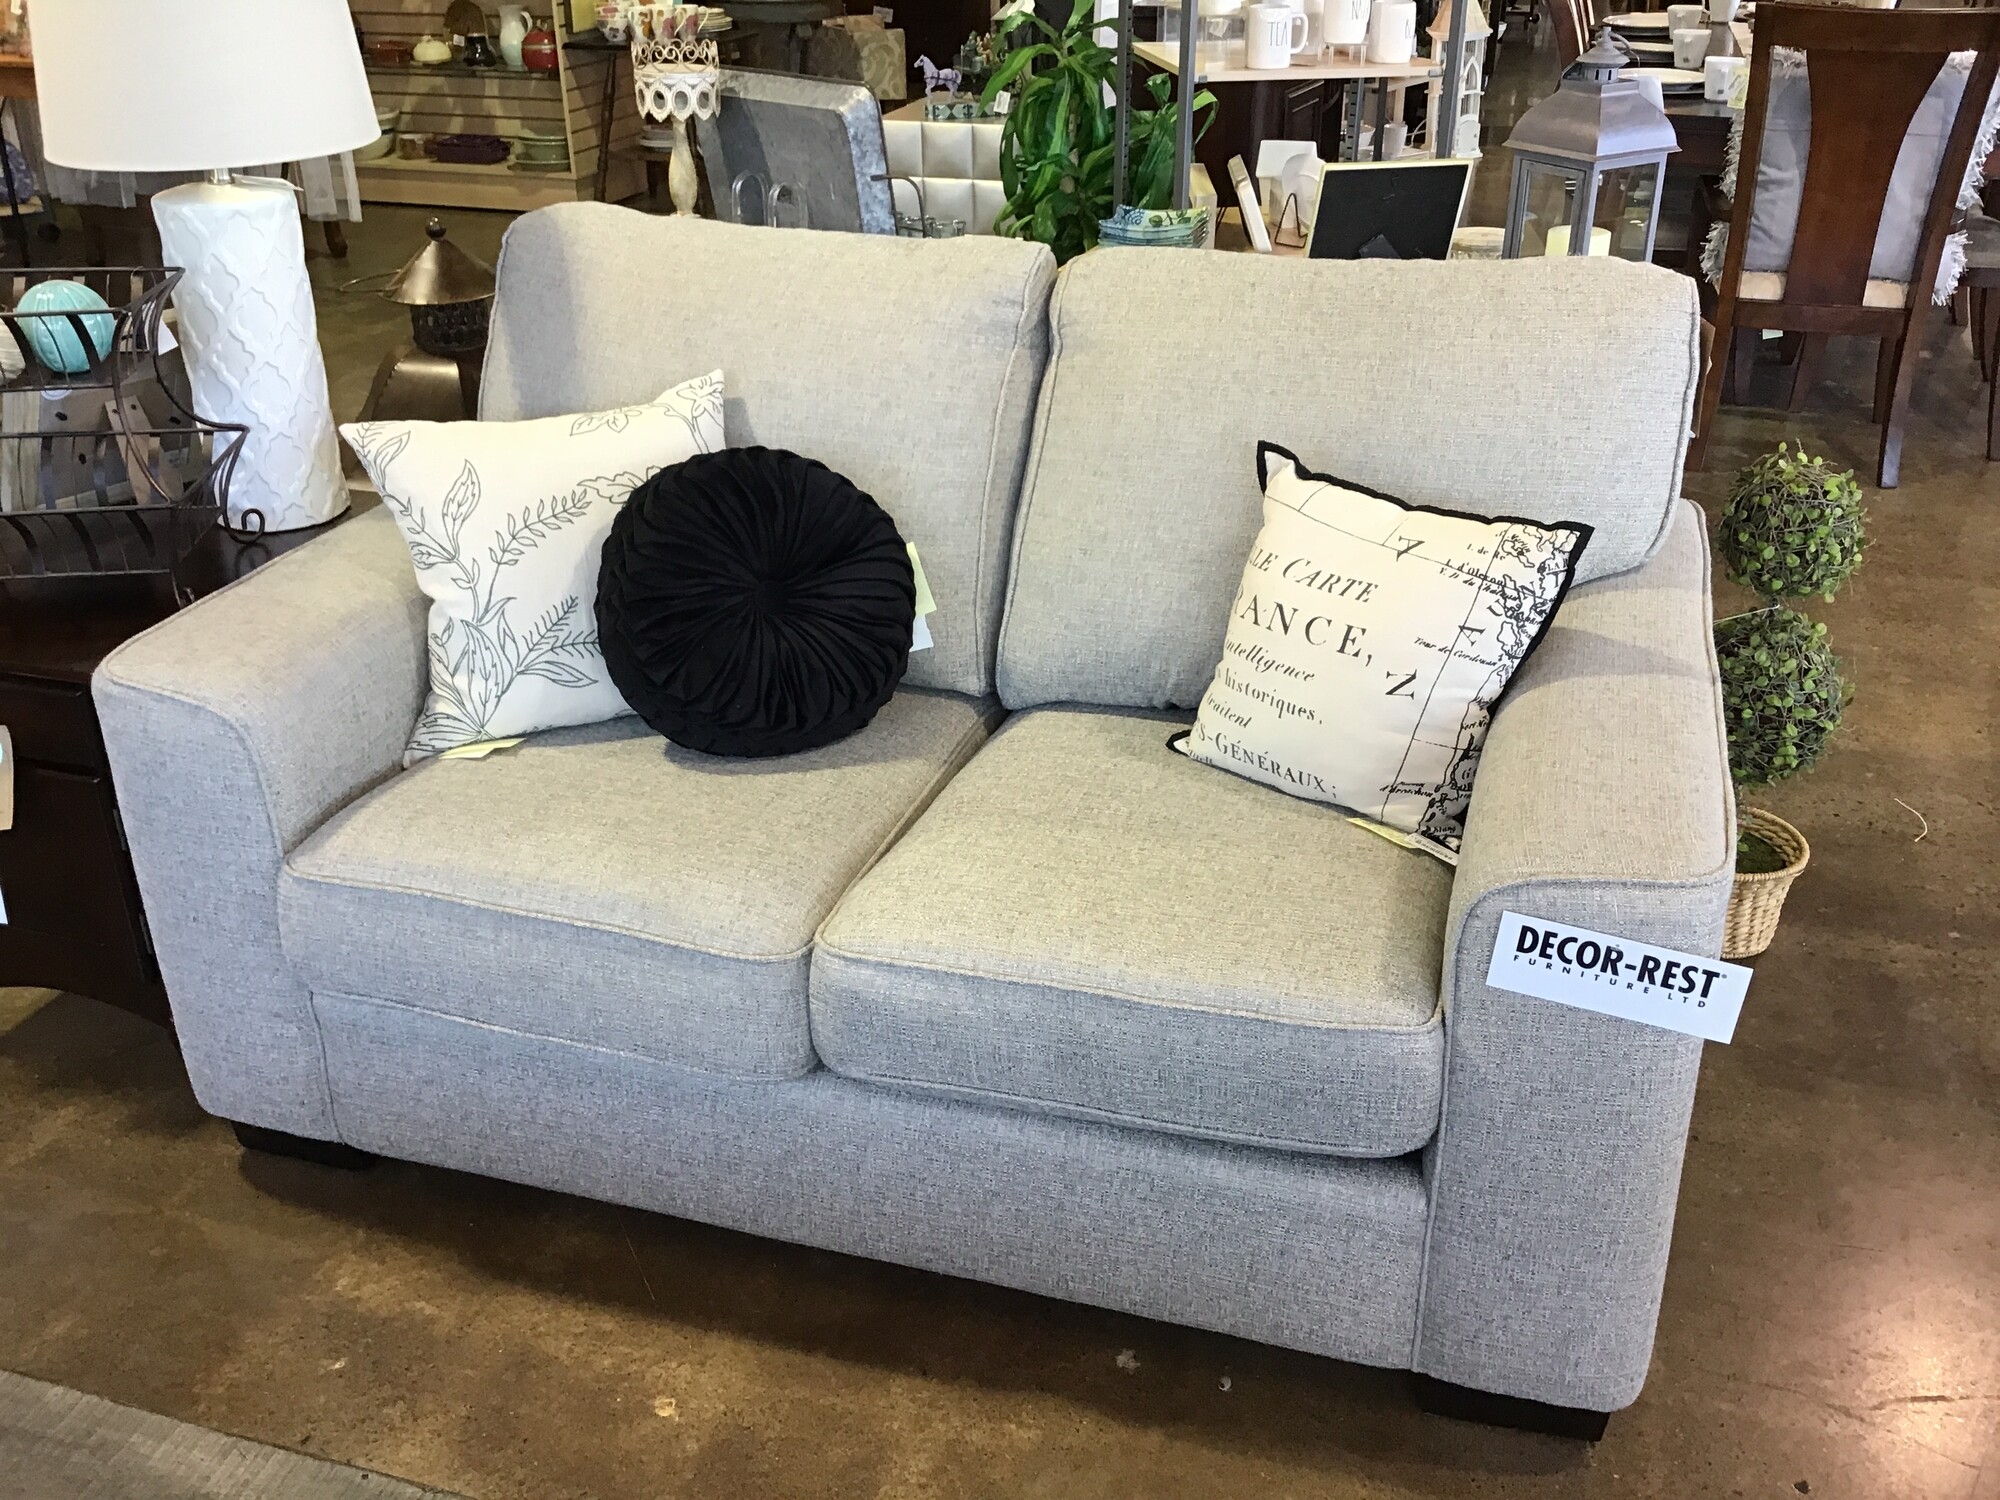 This beautiful neutral loveseat is in excellent condition and very comfortable! It features 2 flippable seat cushions and stationary back cushions. The fabric is a gray/cream tweed. Great piece for your family room, game room or living room.
Dimensions are 63 in x 39 in x 38 in